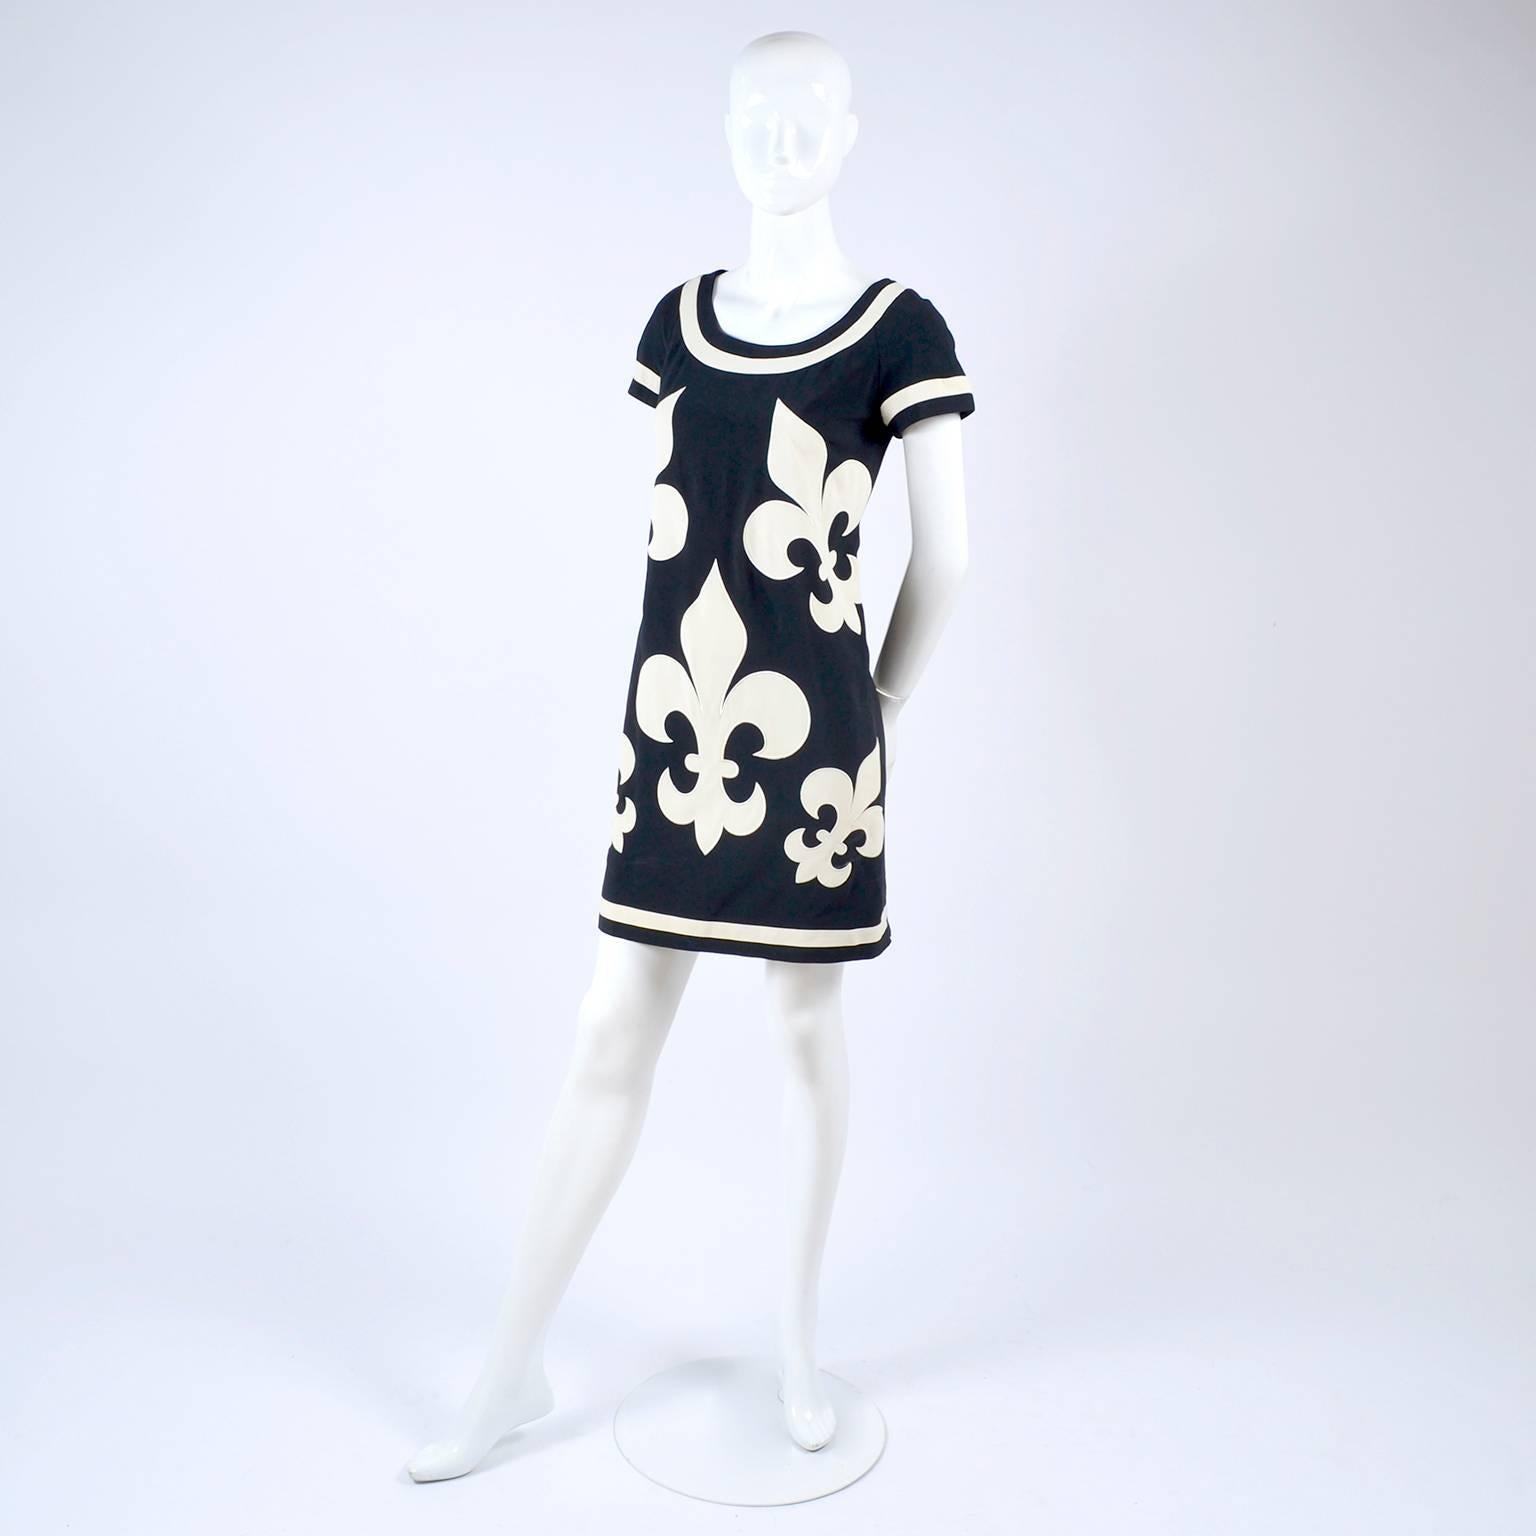 Women's 1989 Vintage Moschino Couture Cruise Me Baby Dress in Bold Fleur de Lis Print